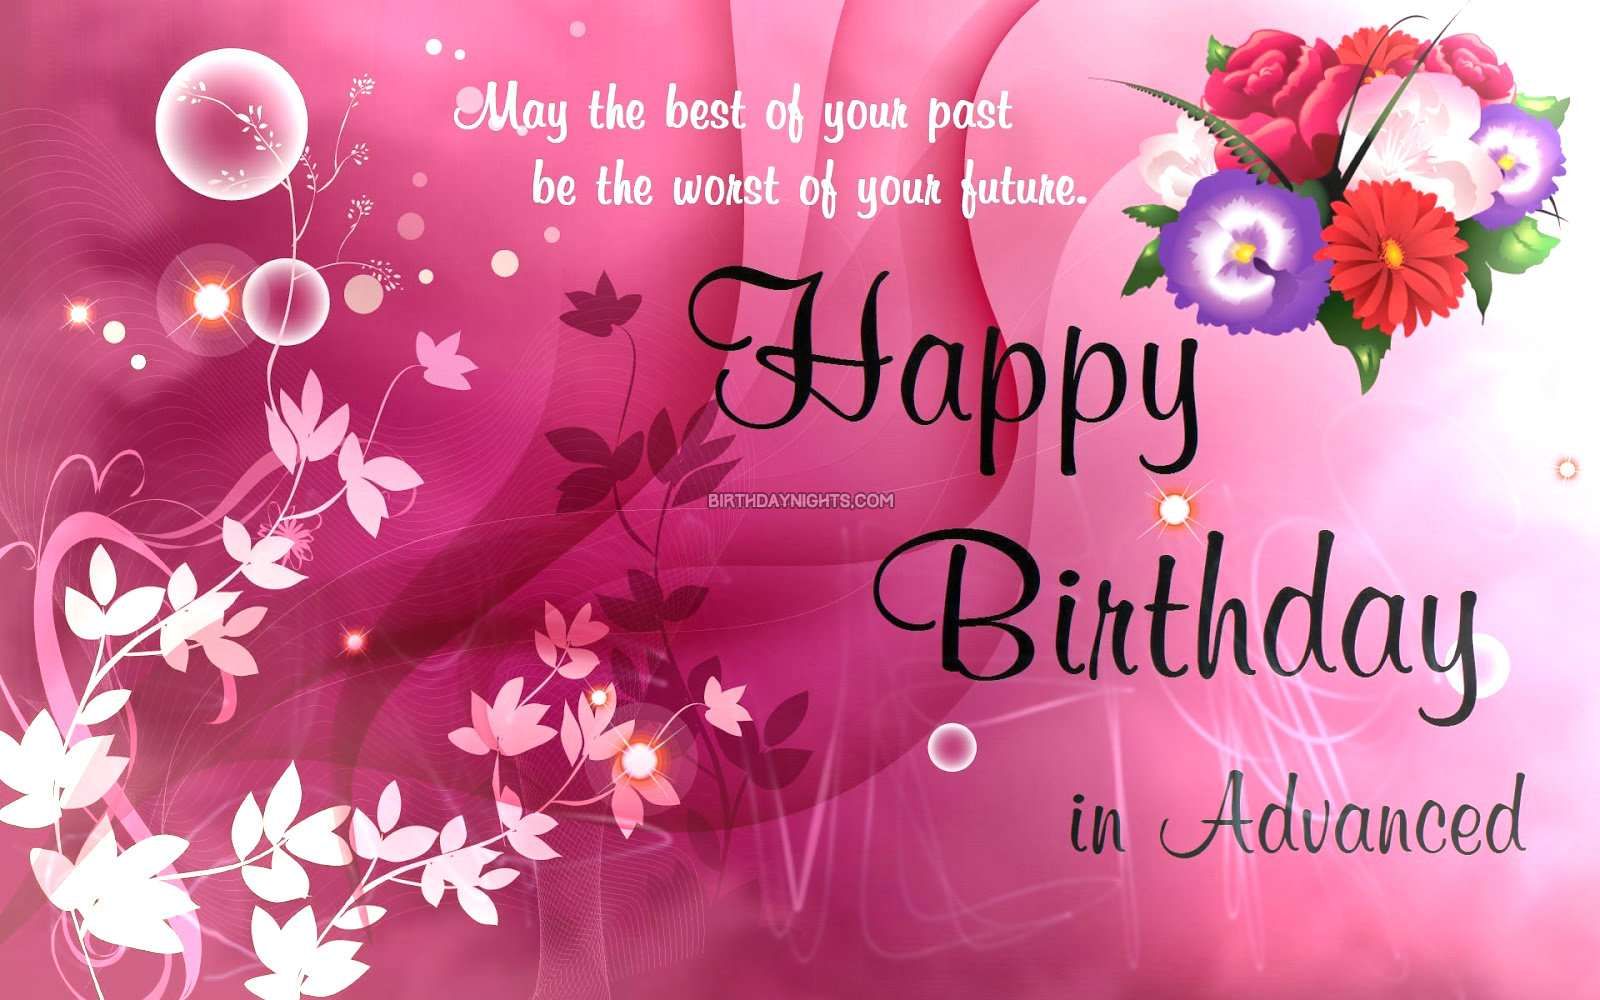 Advance Happy BirtHDay Wishes Pictures Wallpaper